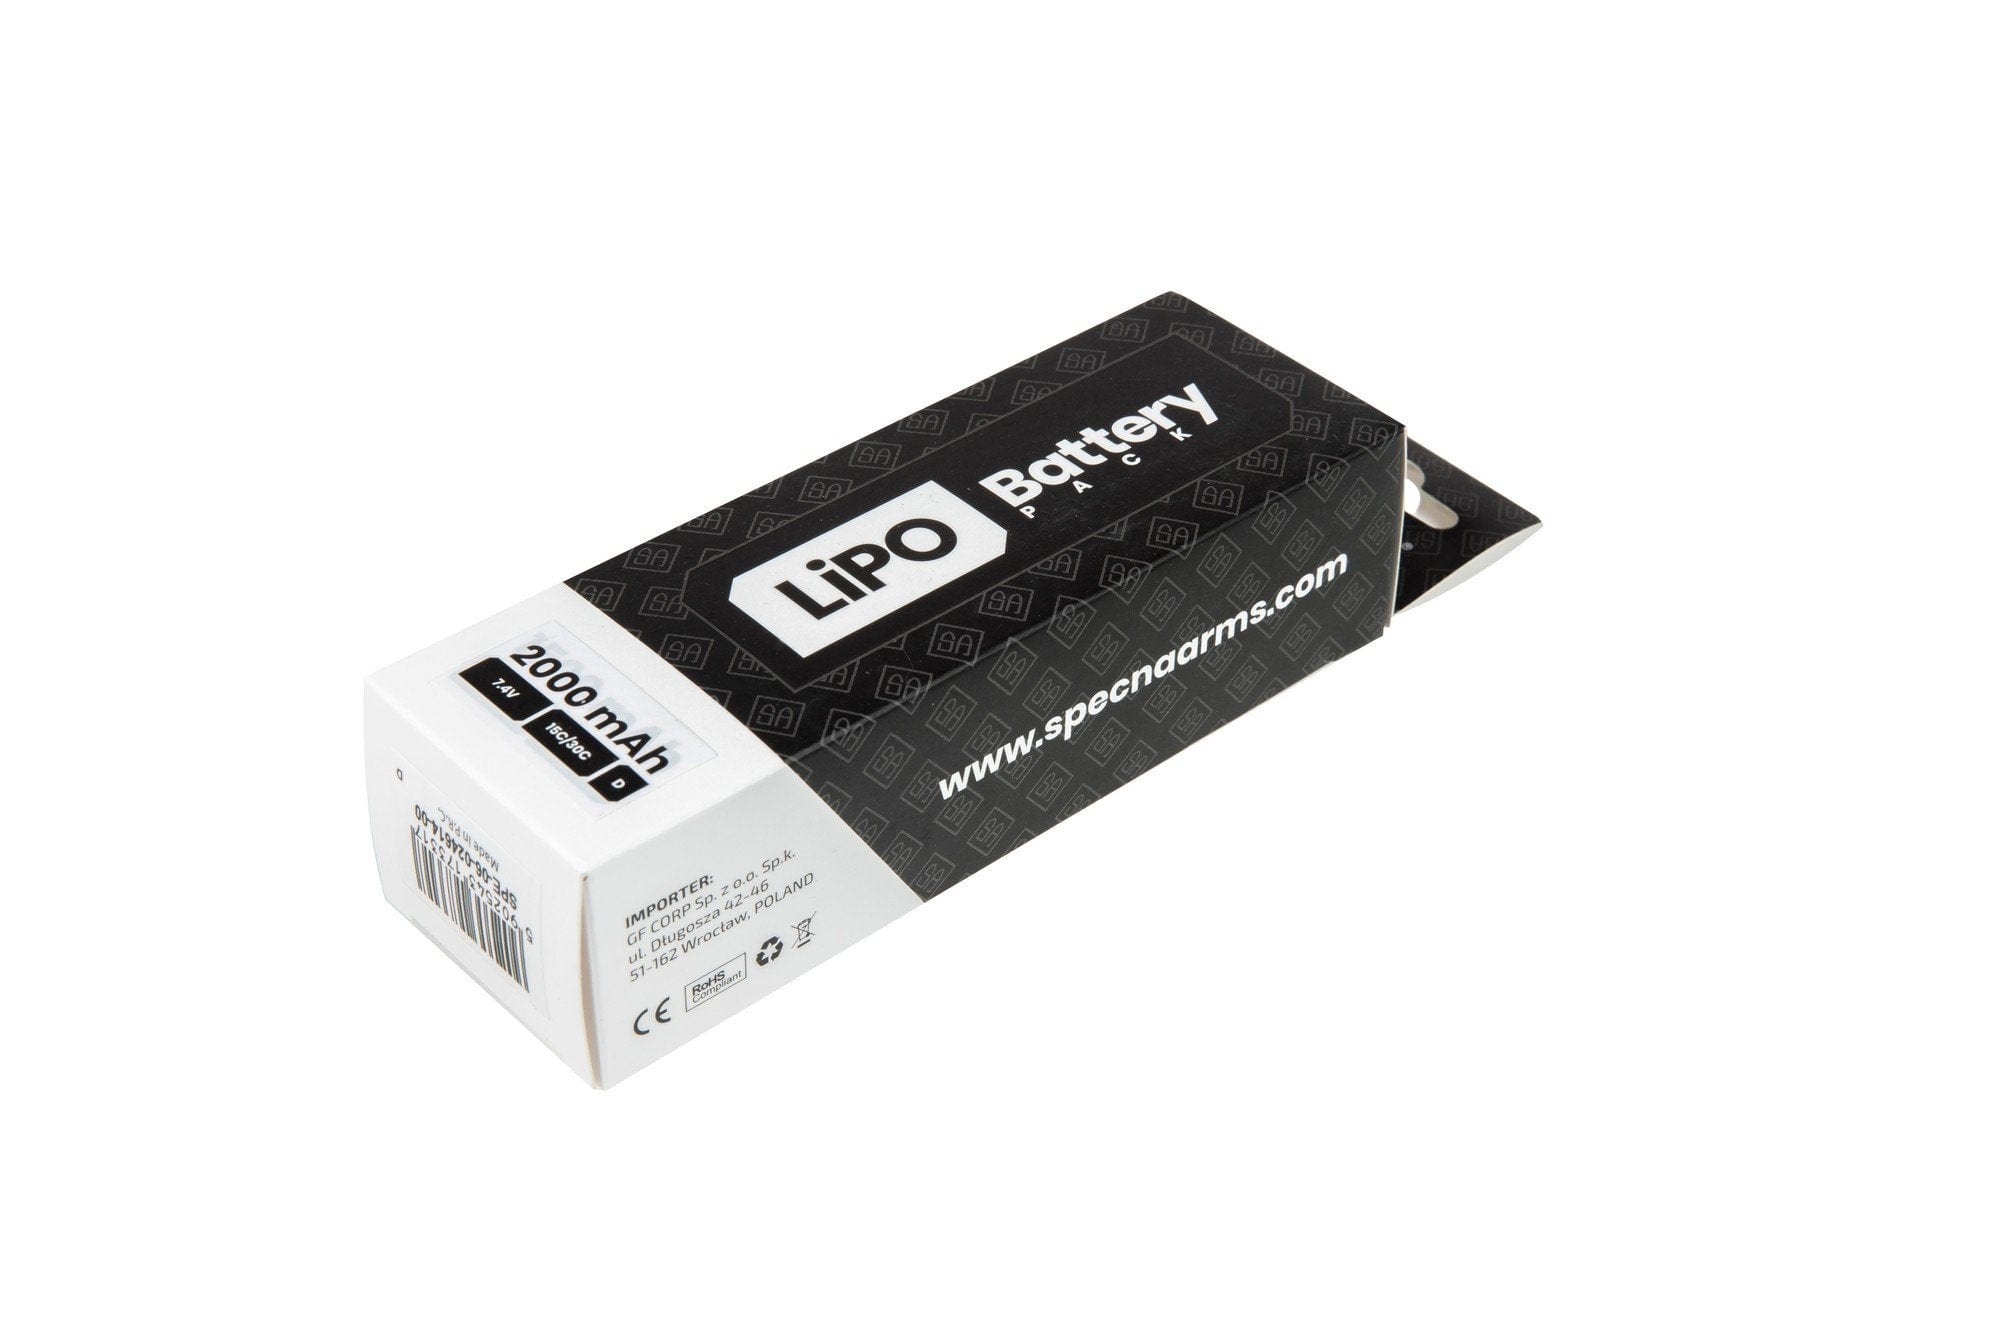 LiPo 7.4V 2000mAh 15 / 30C Battery - T-Connect (Deans) by Specna Arms on Airsoft Mania Europe